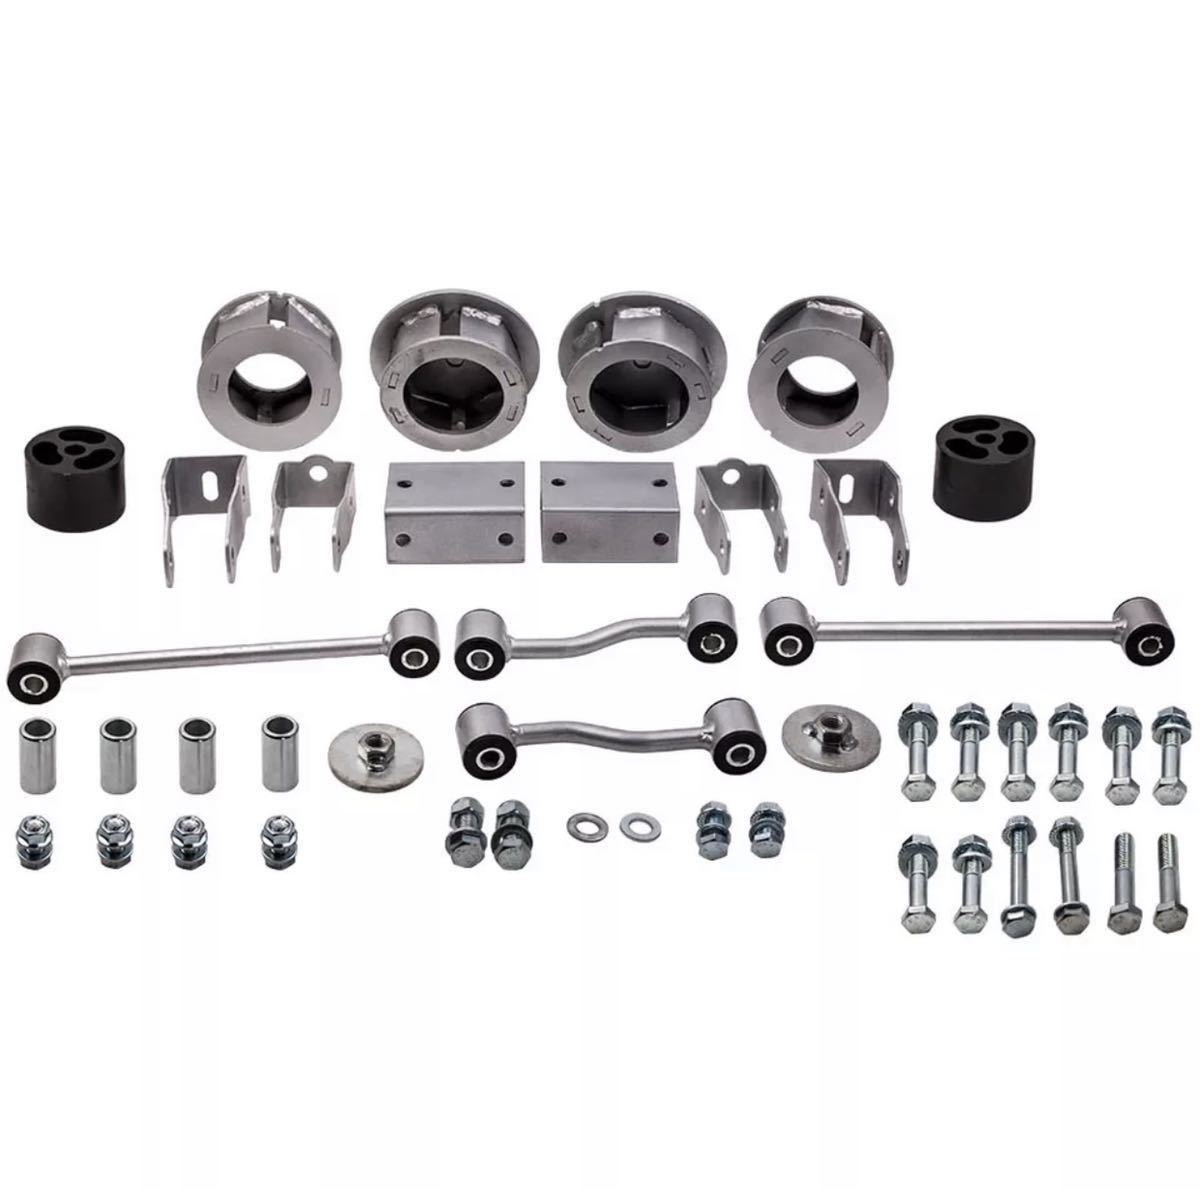  Jeep Wrangler JL lift up kit 2.5 -inch spacer off-road Jeep engine slider baby face full kit off-road vehicle 